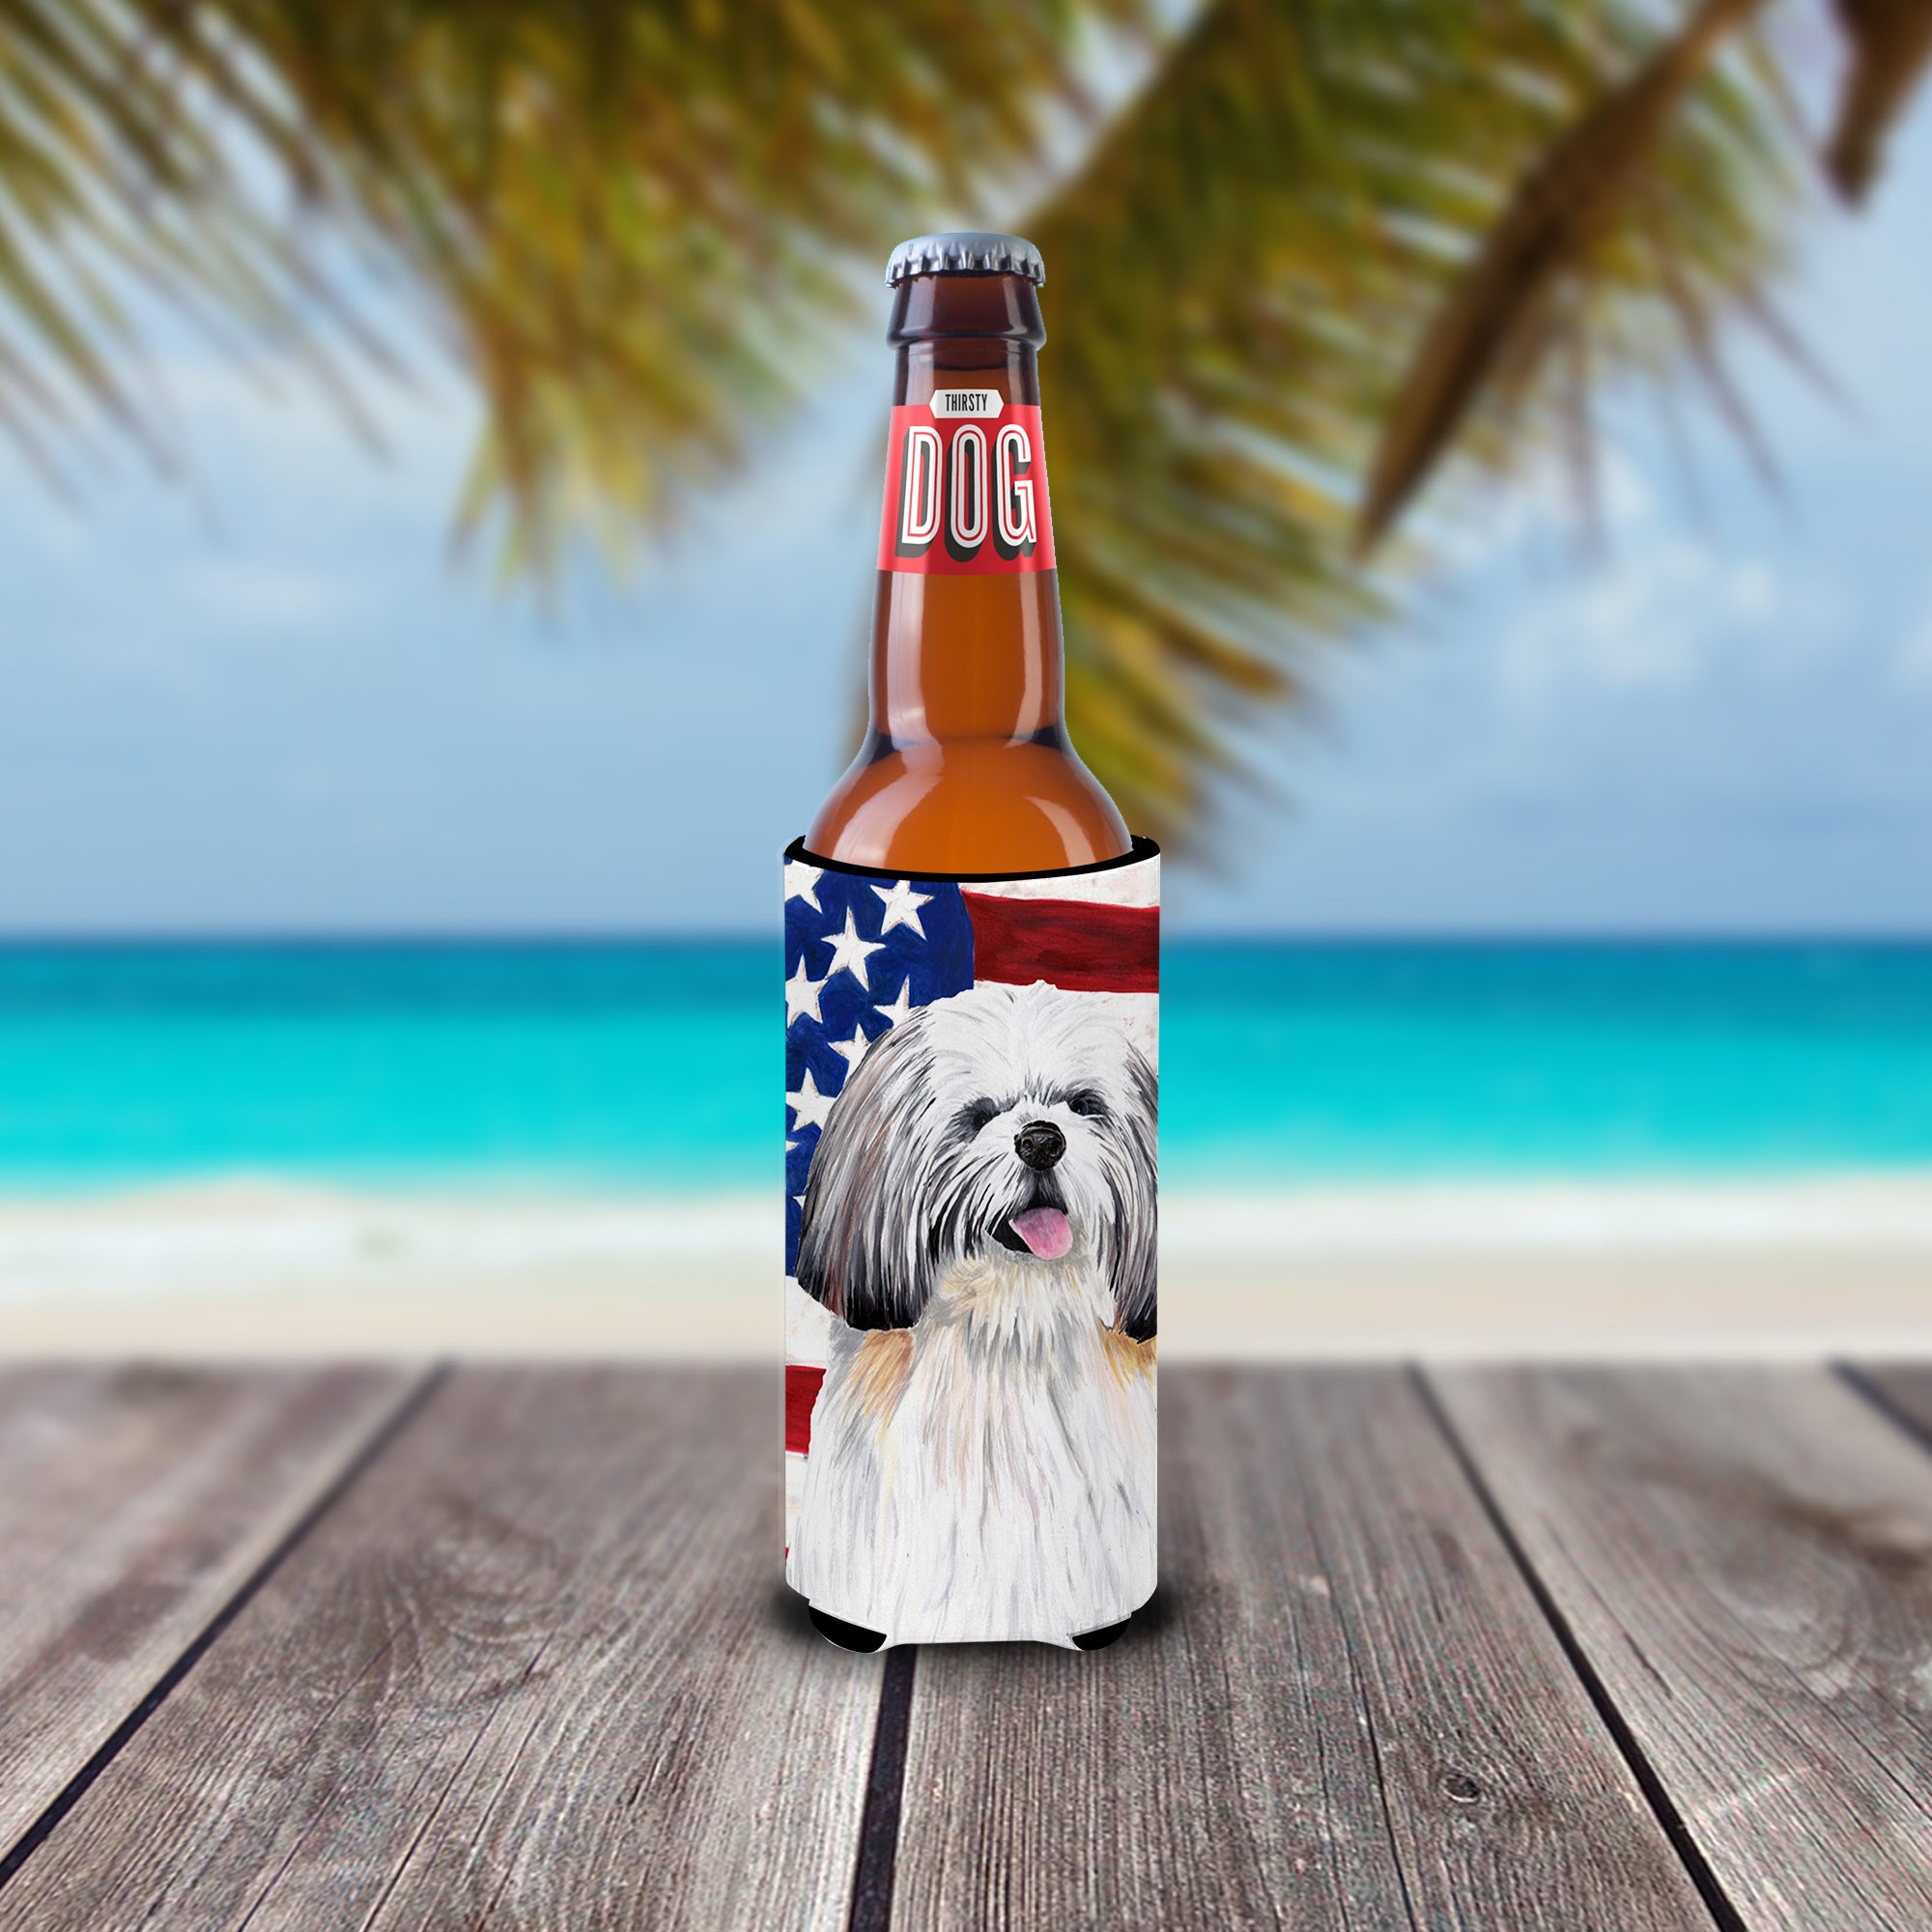 USA American Flag with Shih Tzu Ultra Beverage Insulators for slim cans SC9028MUK